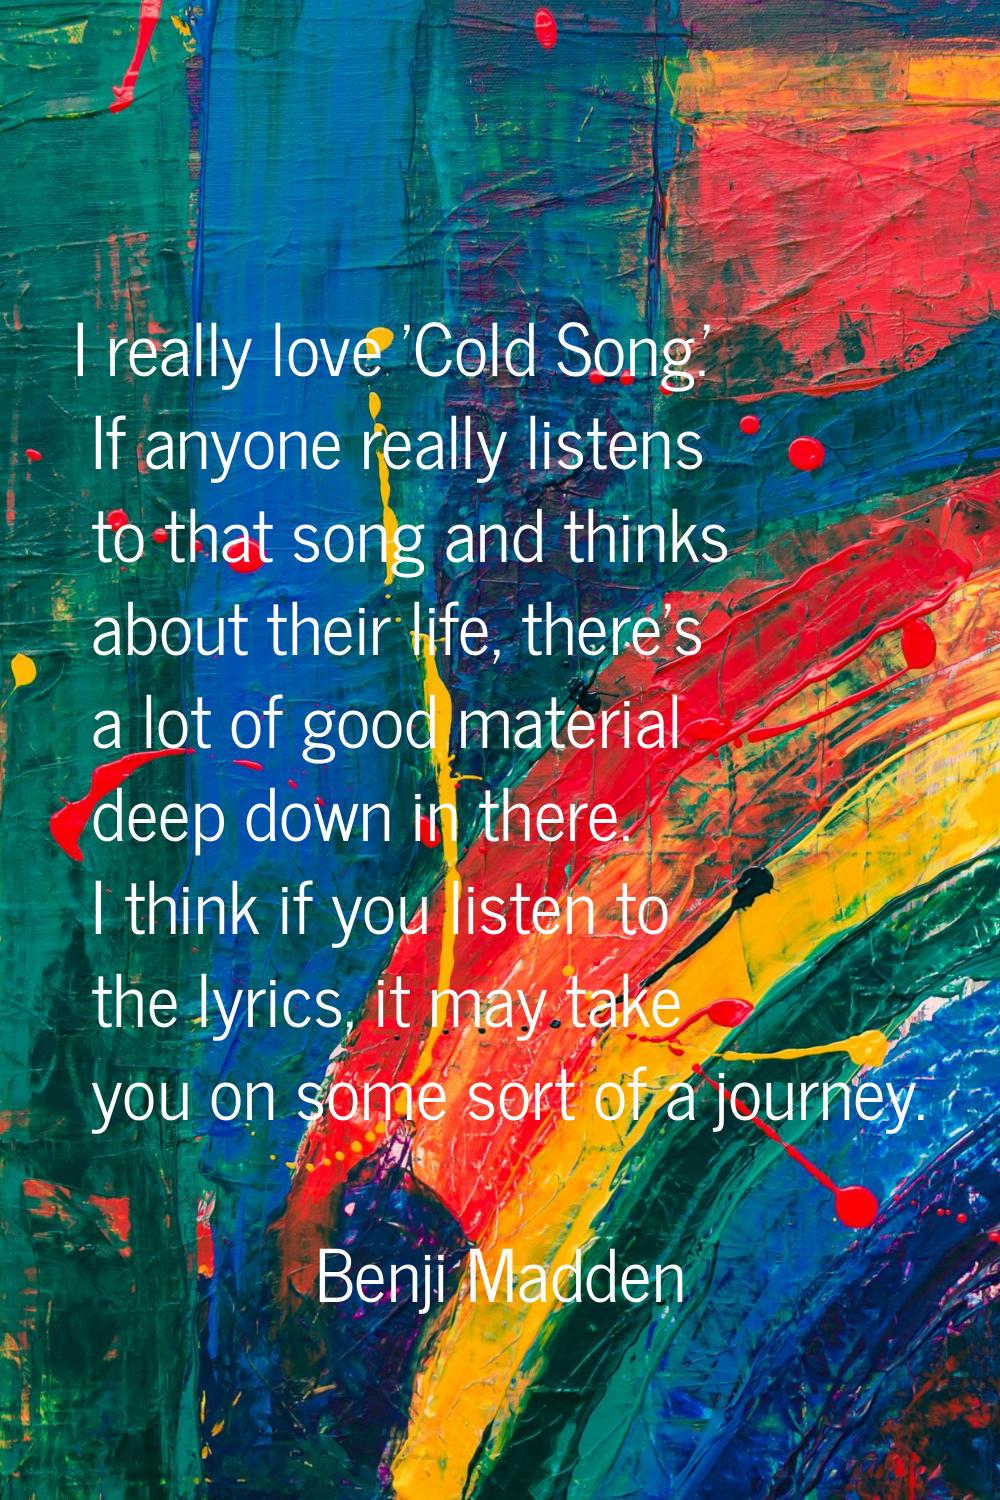 I really love 'Cold Song.' If anyone really listens to that song and thinks about their life, there